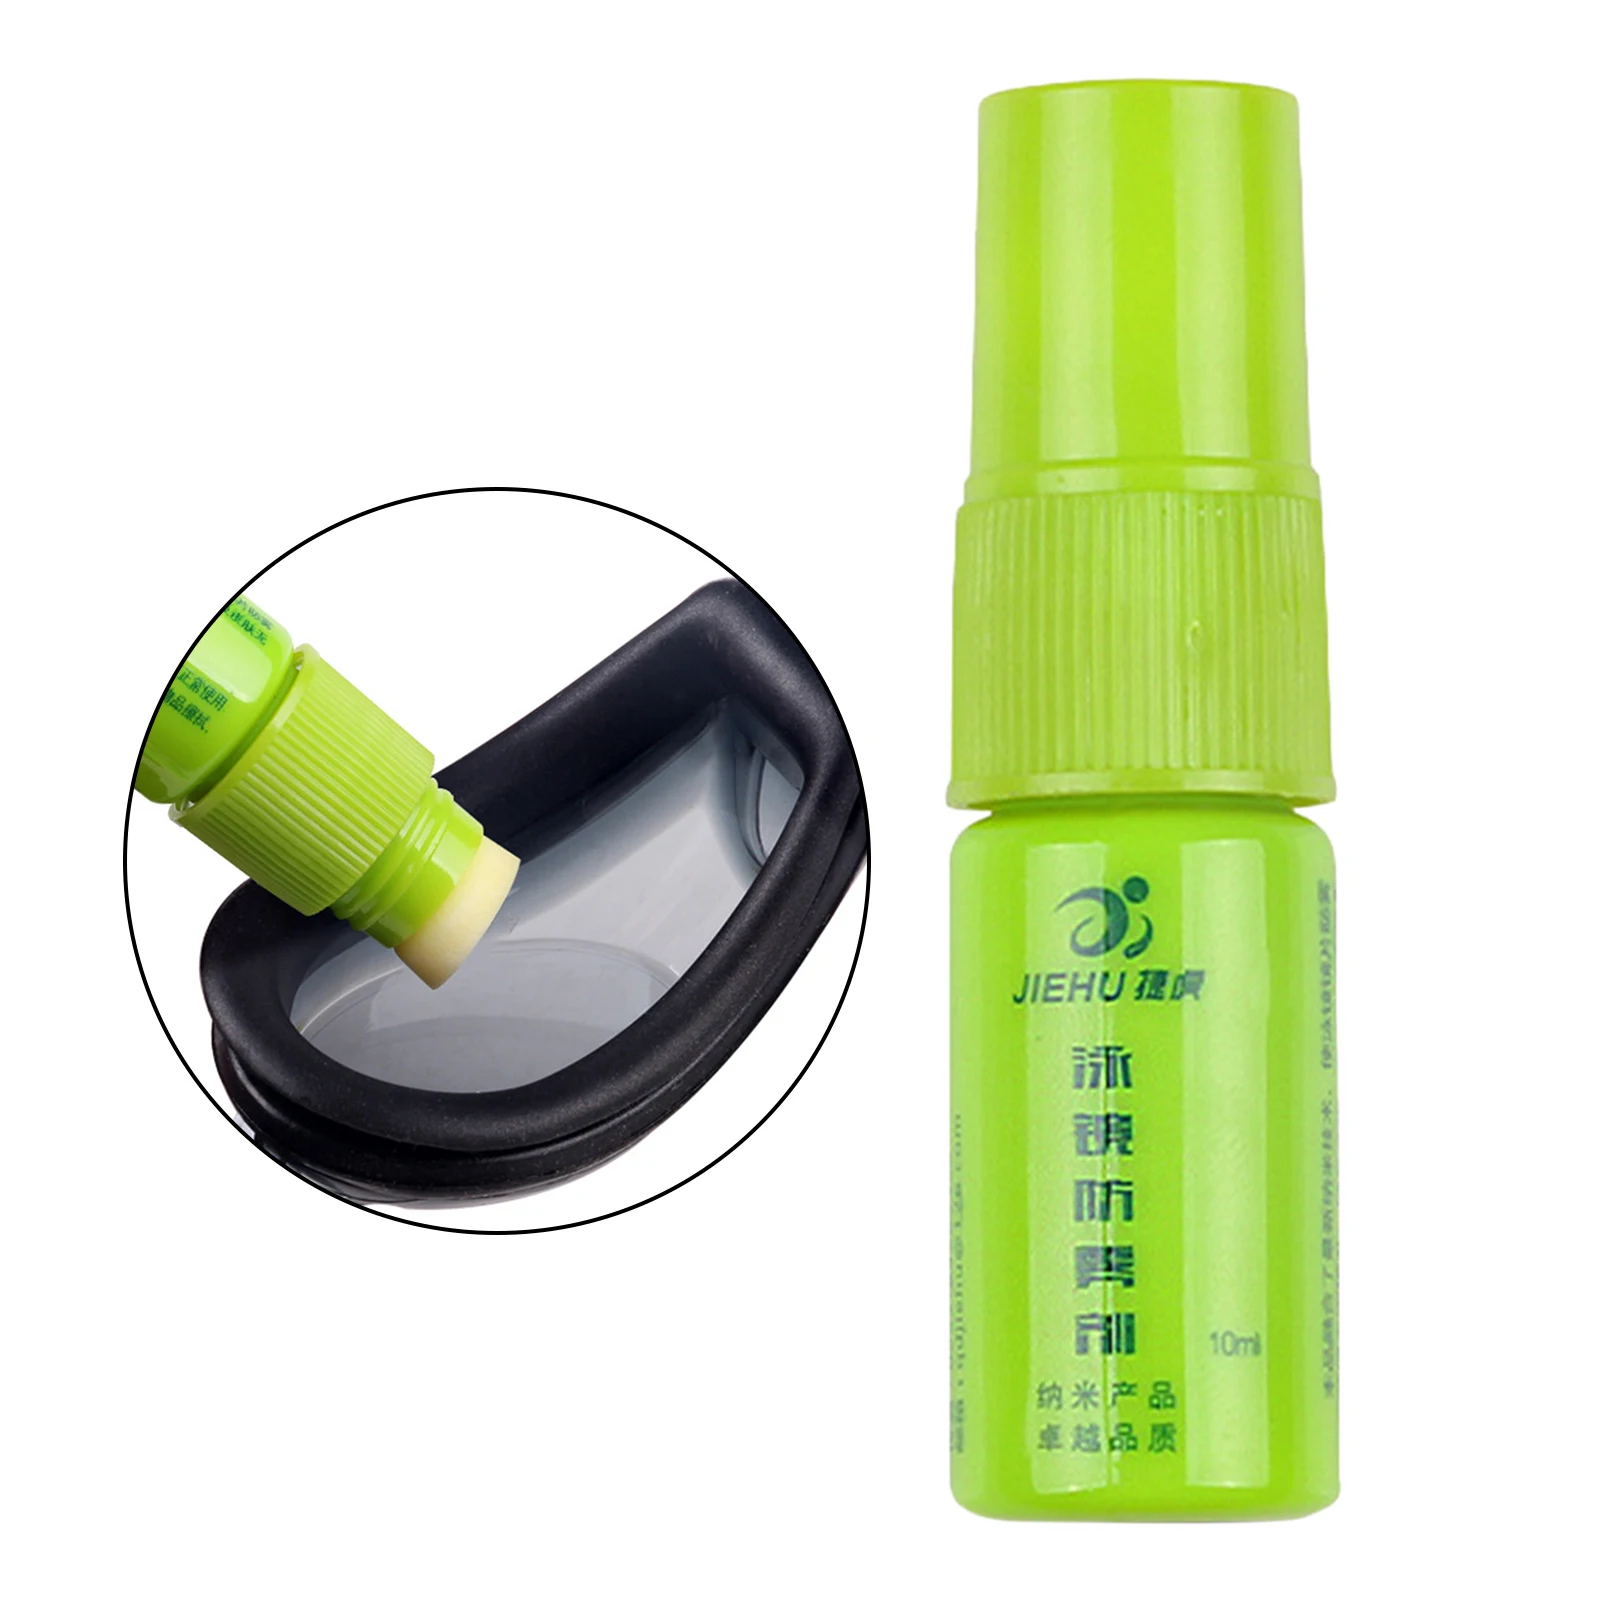 10ml Durable Solid State Nano Anti Fog Agent Defogger for Diving Mask Goggles Car Glass Swim Diving Goggles Glasses Accessories